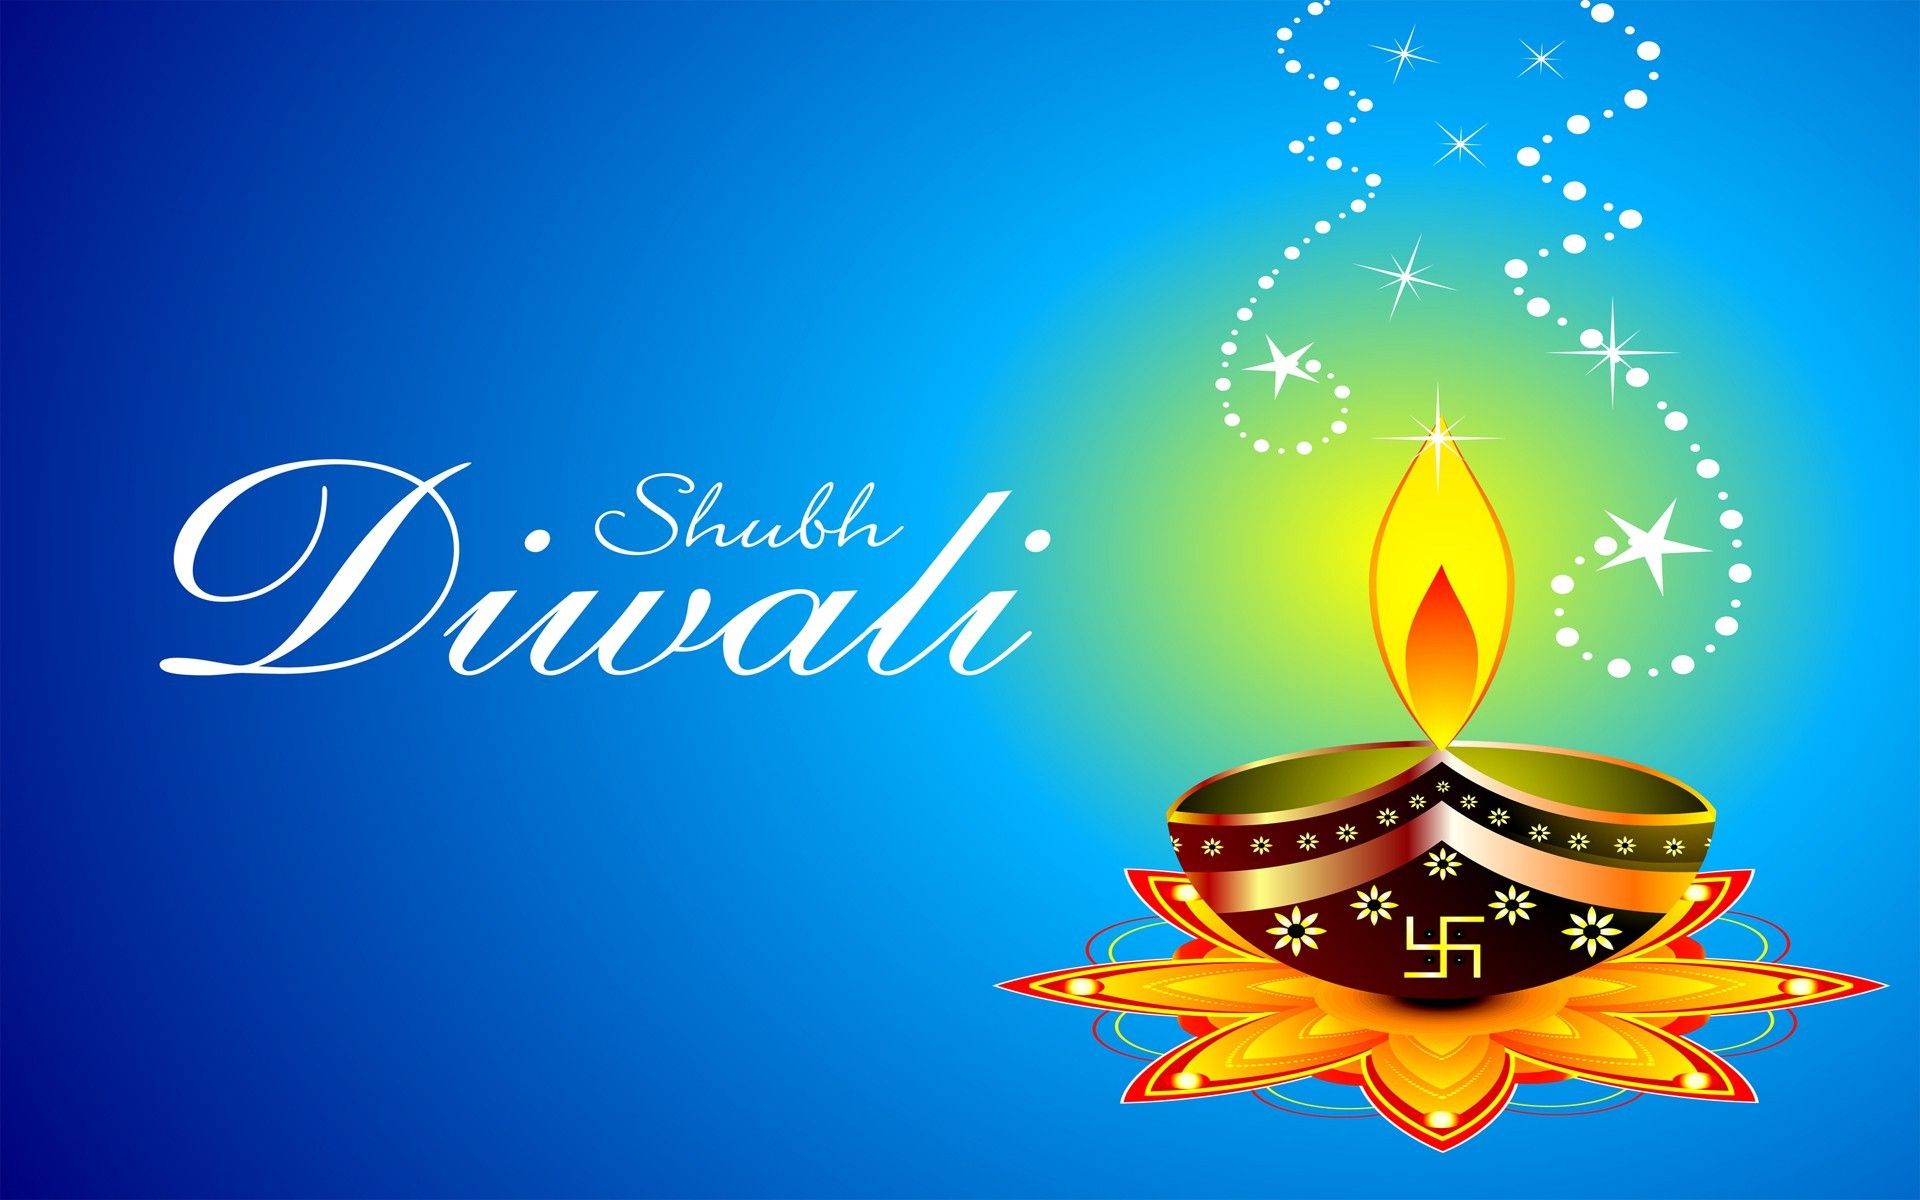 Diwali Wallpapers Free Download HD Latest Indian Celebration Images